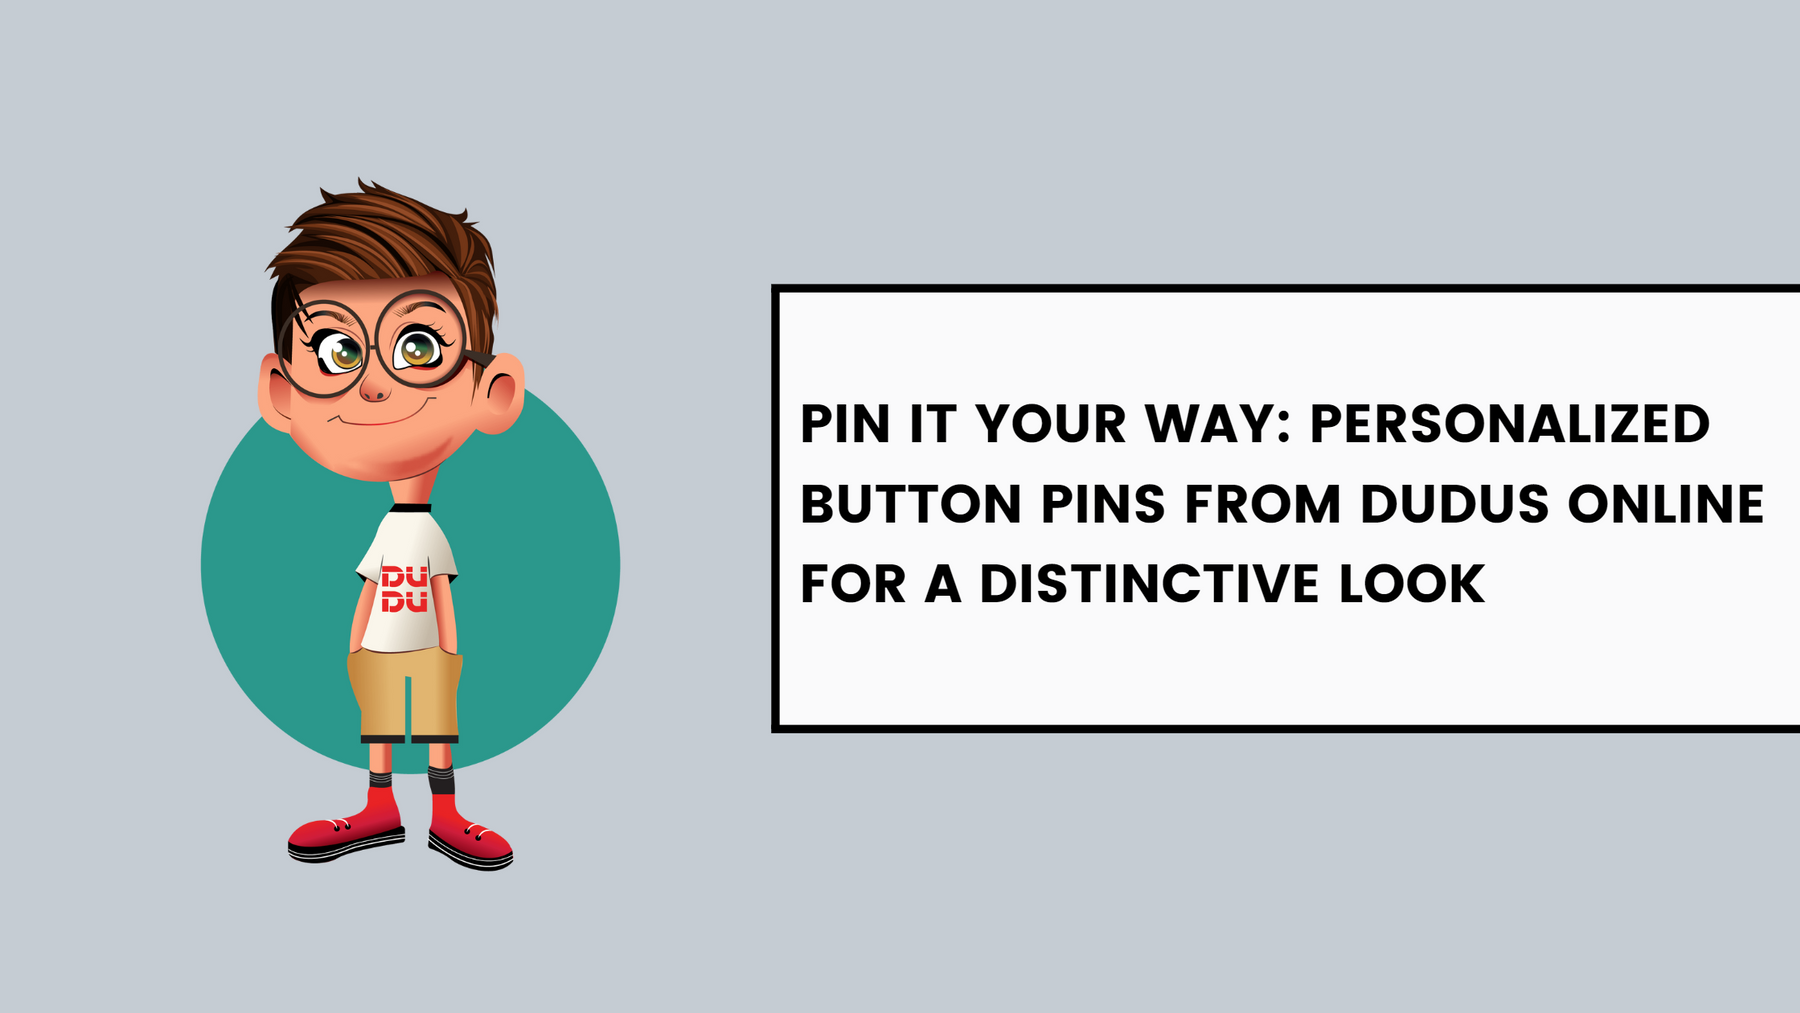 Pin It Your Way: Personalized Button Pins From Dudus Online For A Distinctive Look